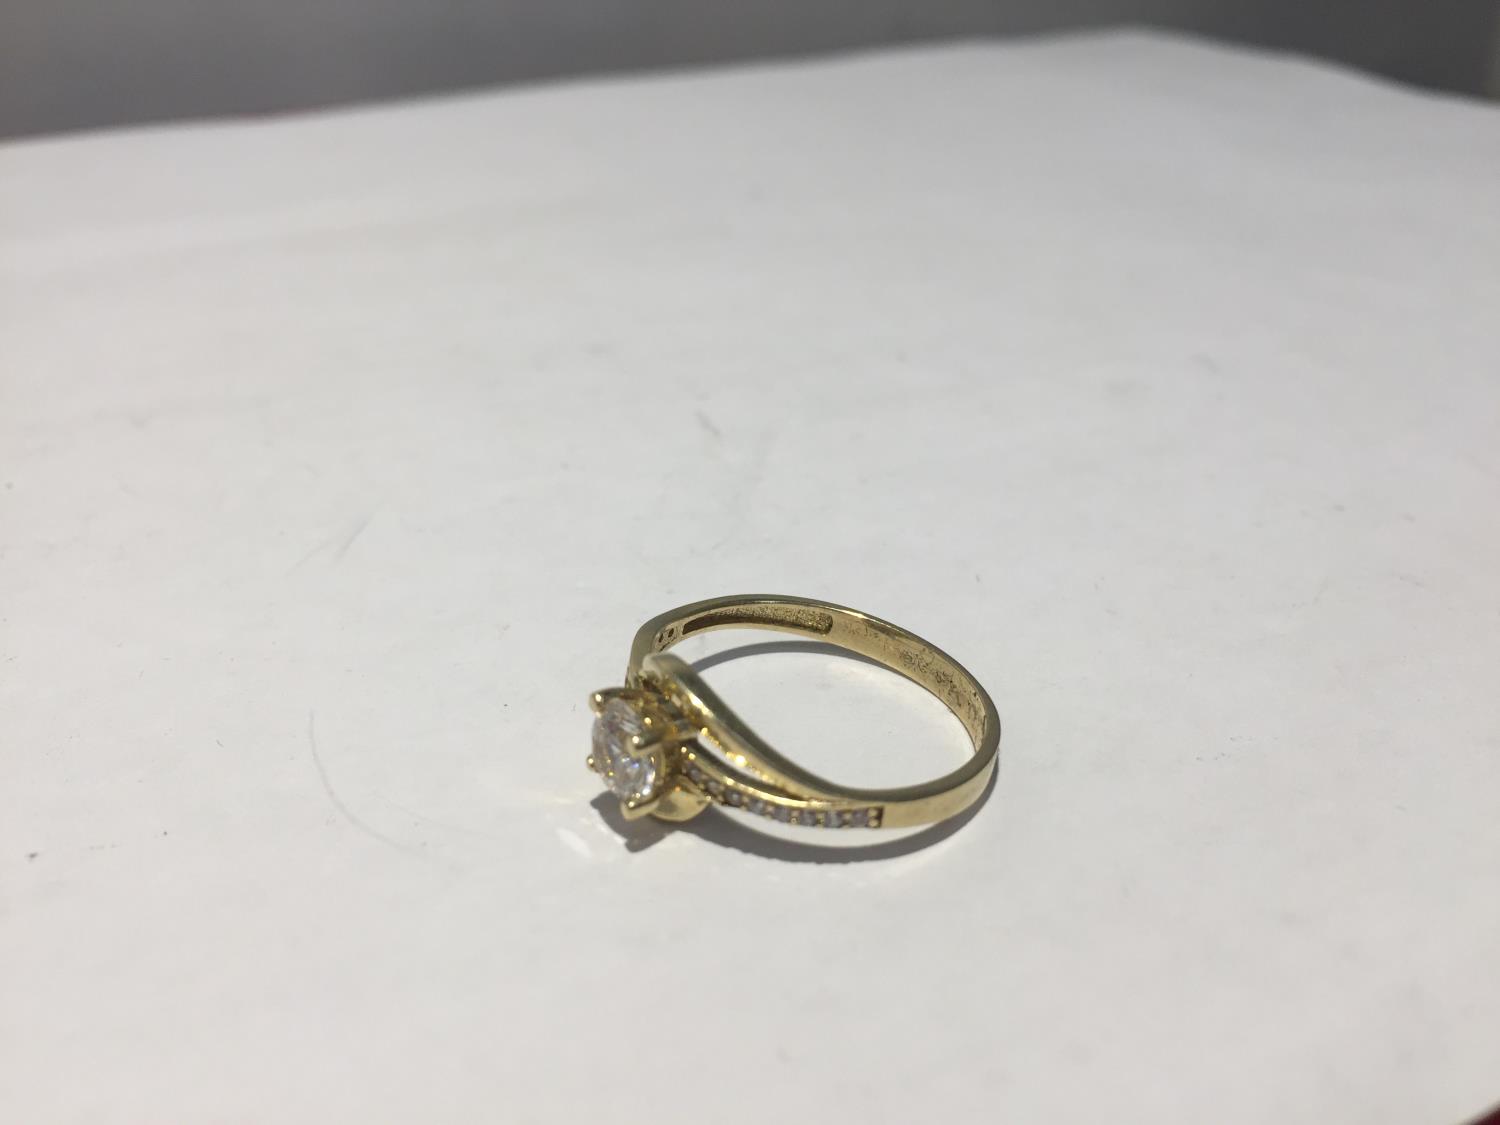 A 9 CARAT GOLD RING WITH A CLEAR STONE SOLITAIRE AND CLEAR STONES ON THE SHOULDERS WITH PRESENTATION - Image 2 of 4